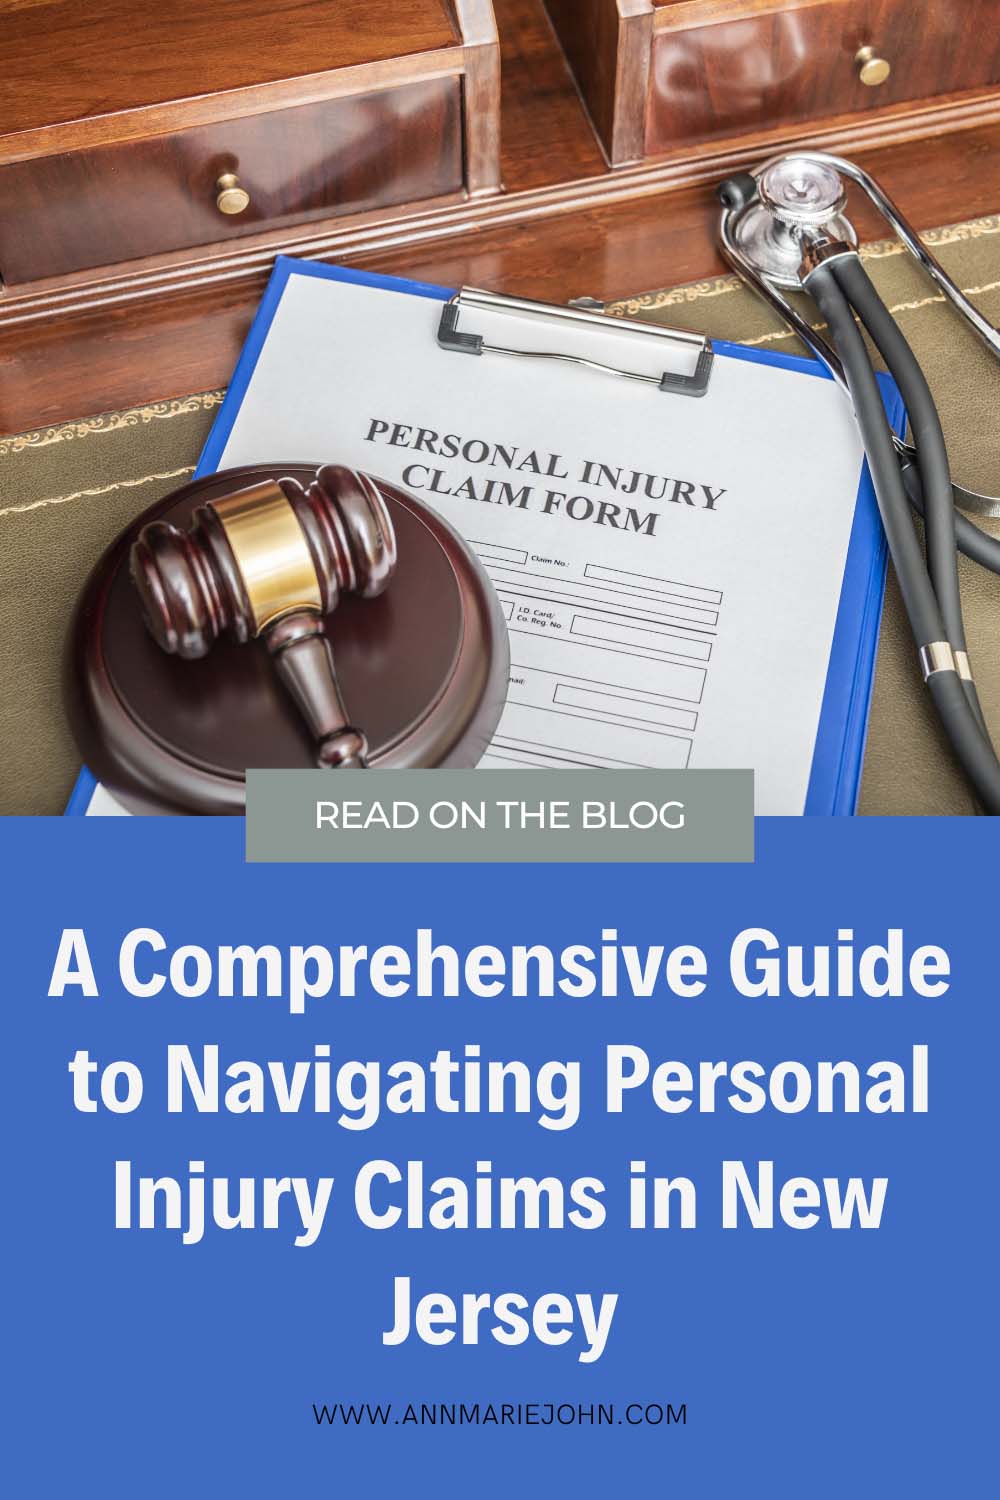 Navigating Personal Injury Claims in New Jersey: A Comprehensive Guide